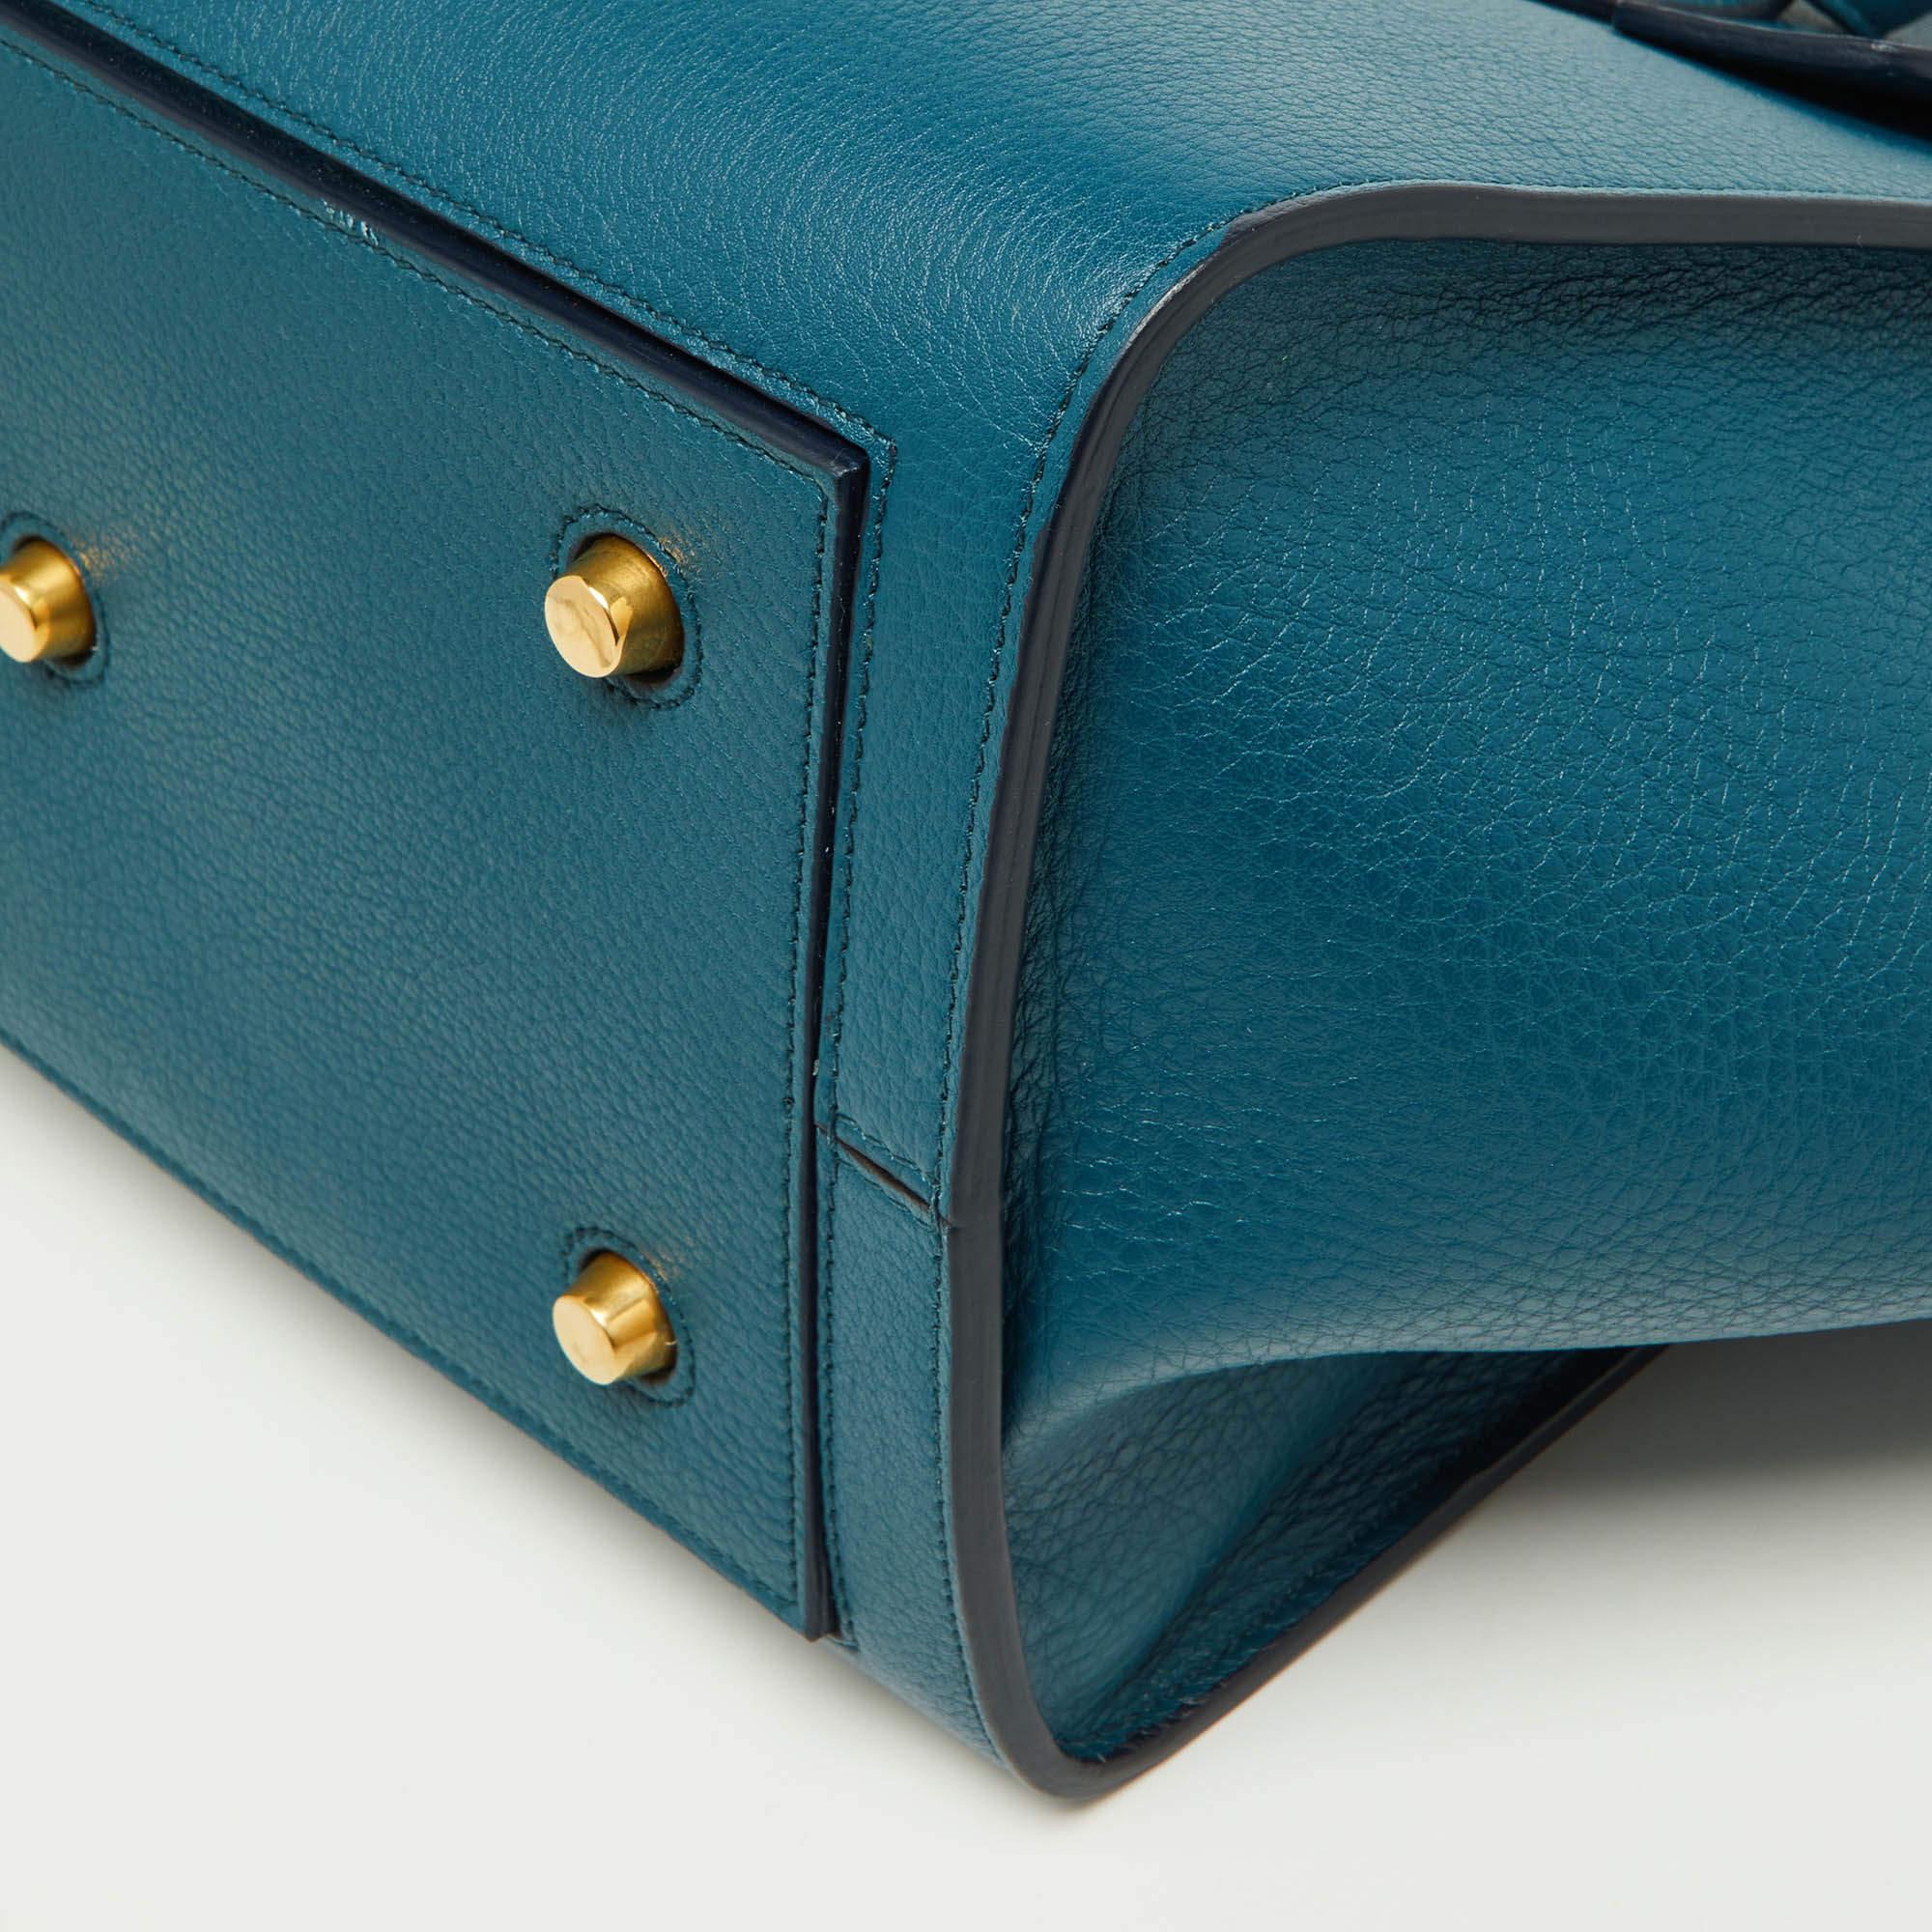 Celine Teal Blue Leather Small Tie Tote For Sale 3